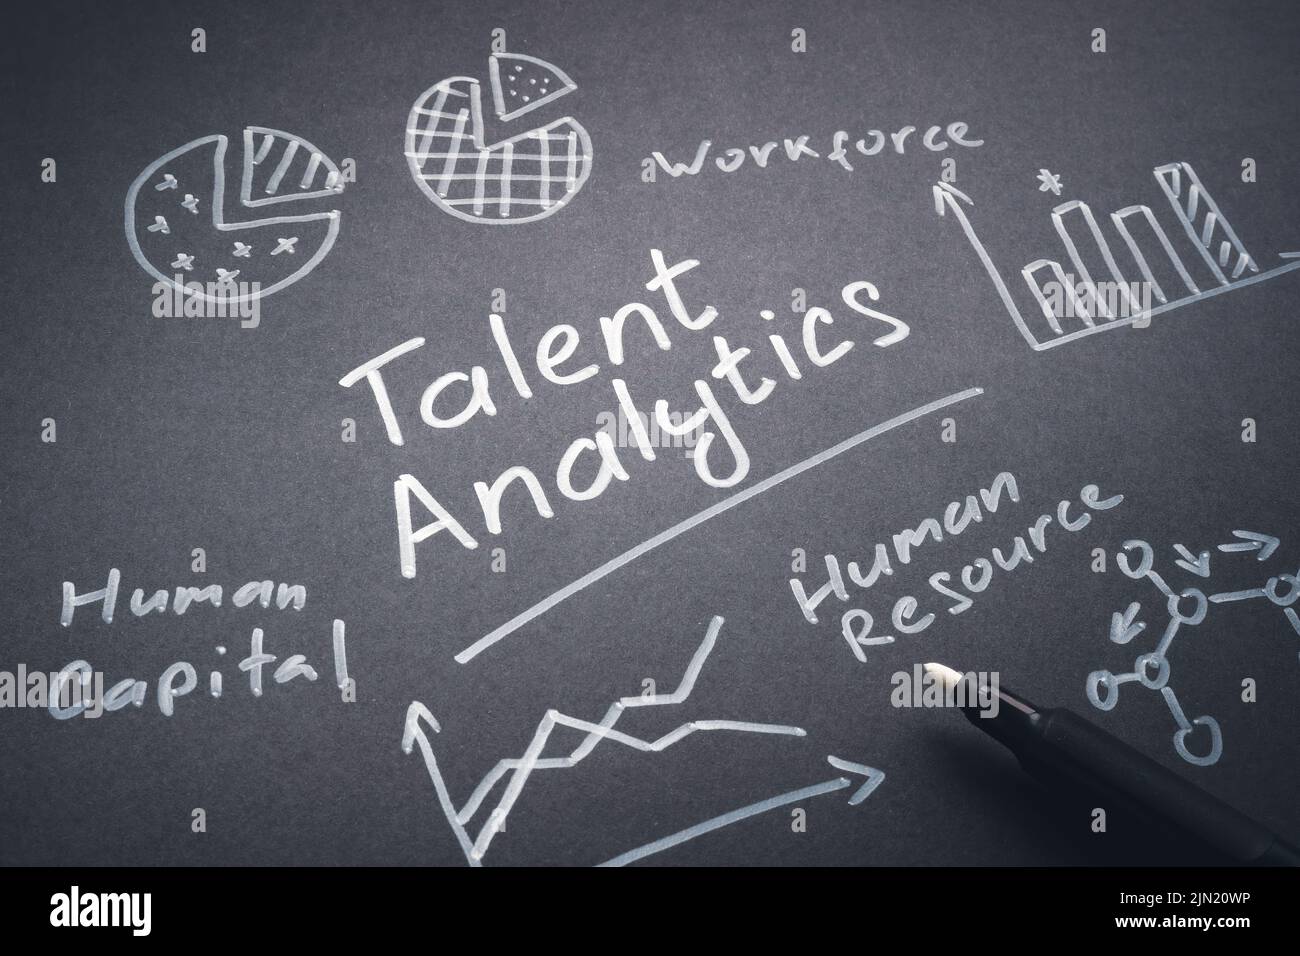 Handwritten talent analysis and charts on the dark page. Stock Photo